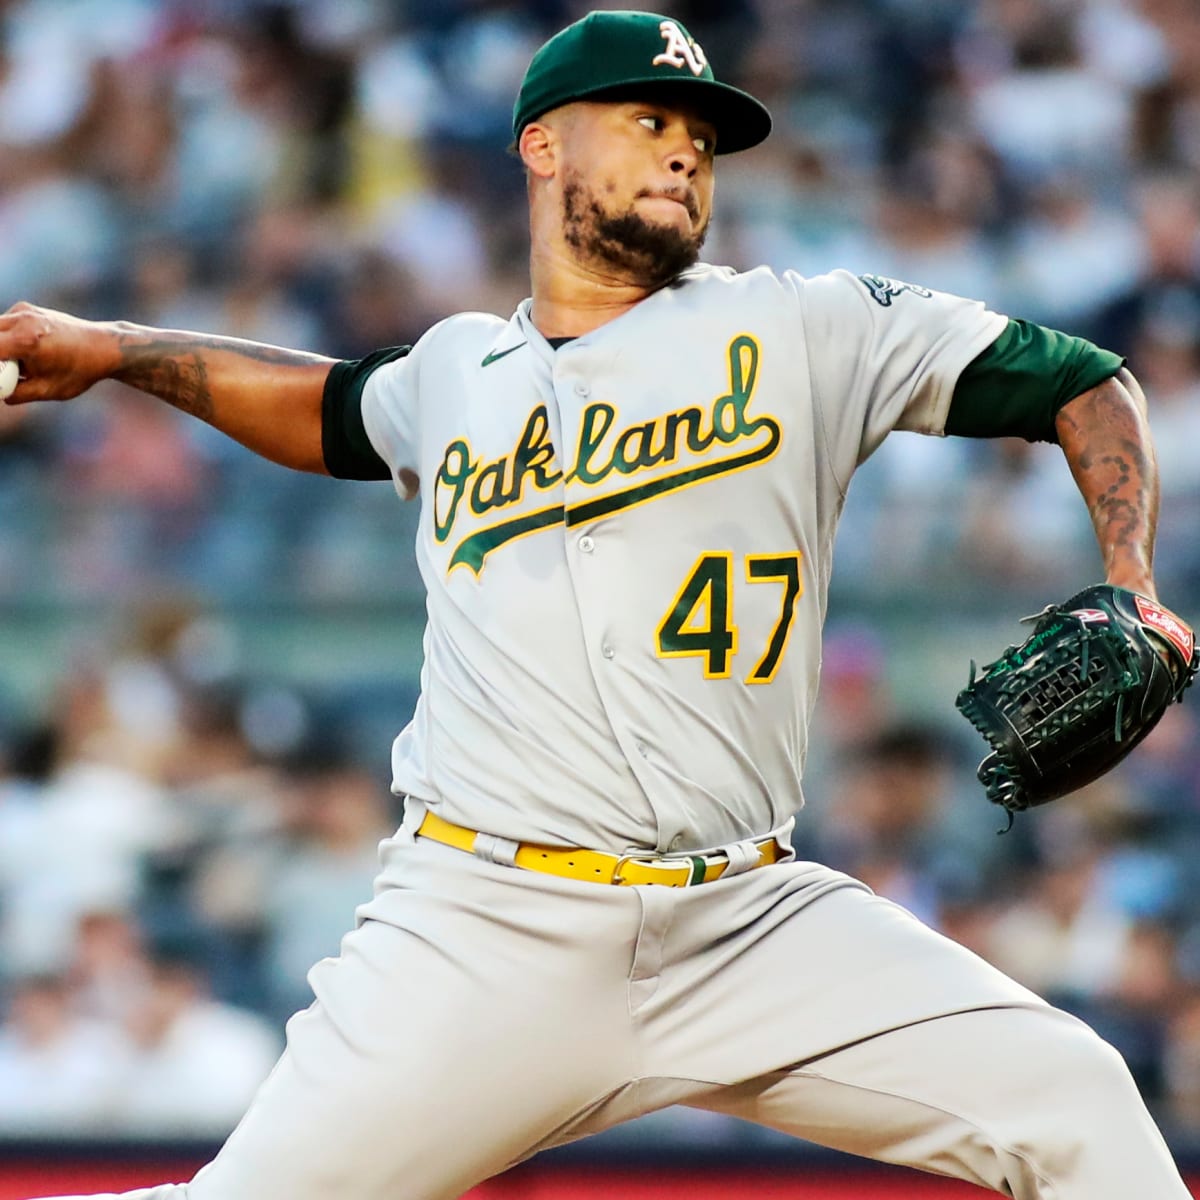 Cardinals should move to get Manaea or Montas from Athletics